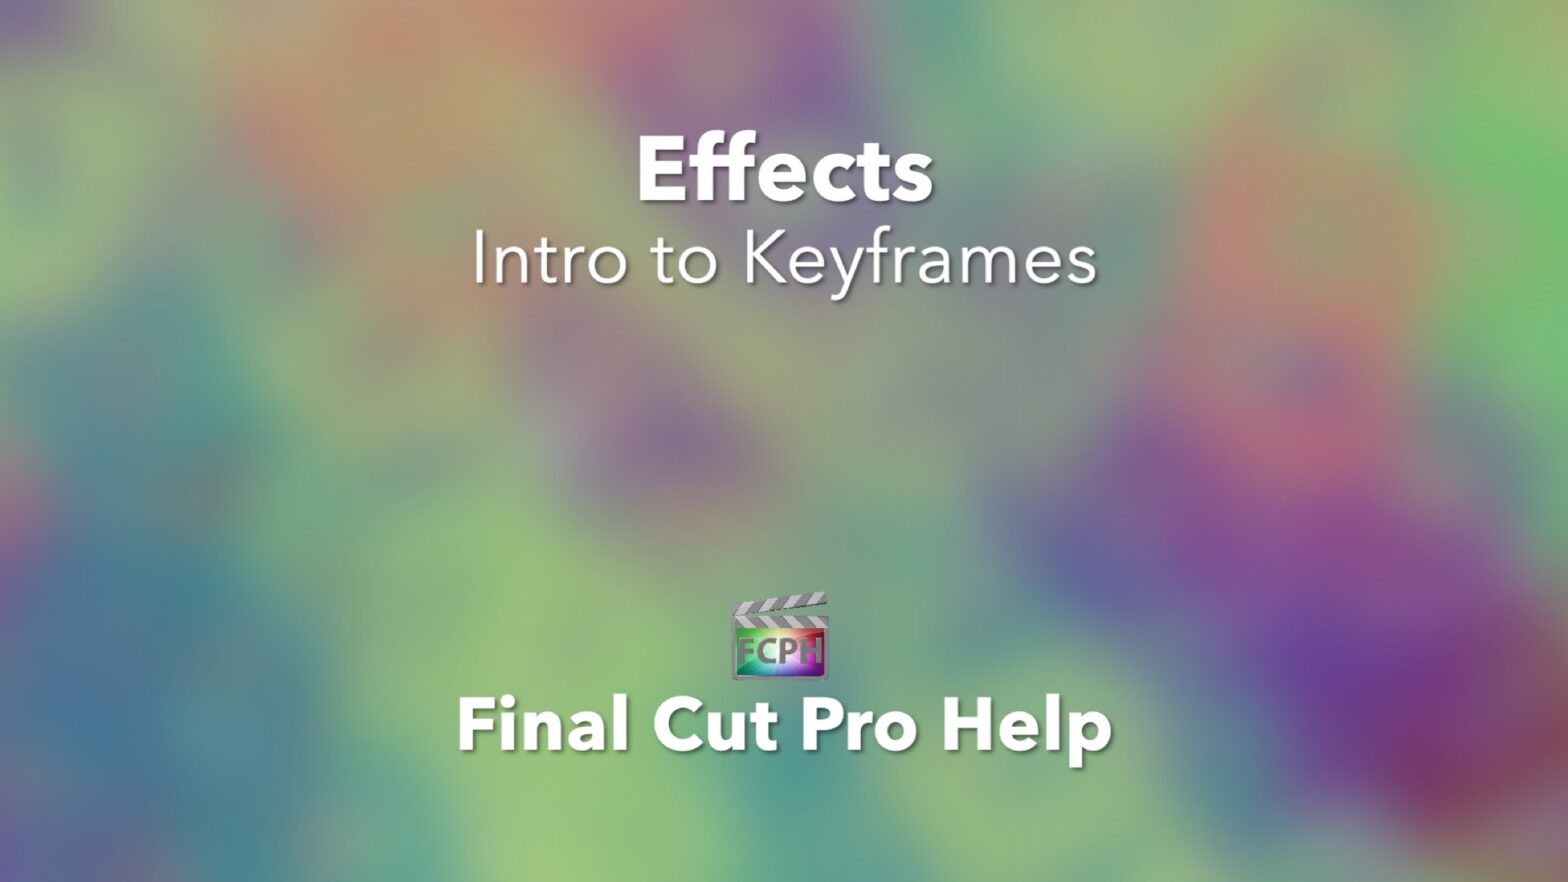 Effects Intro to Keyframes